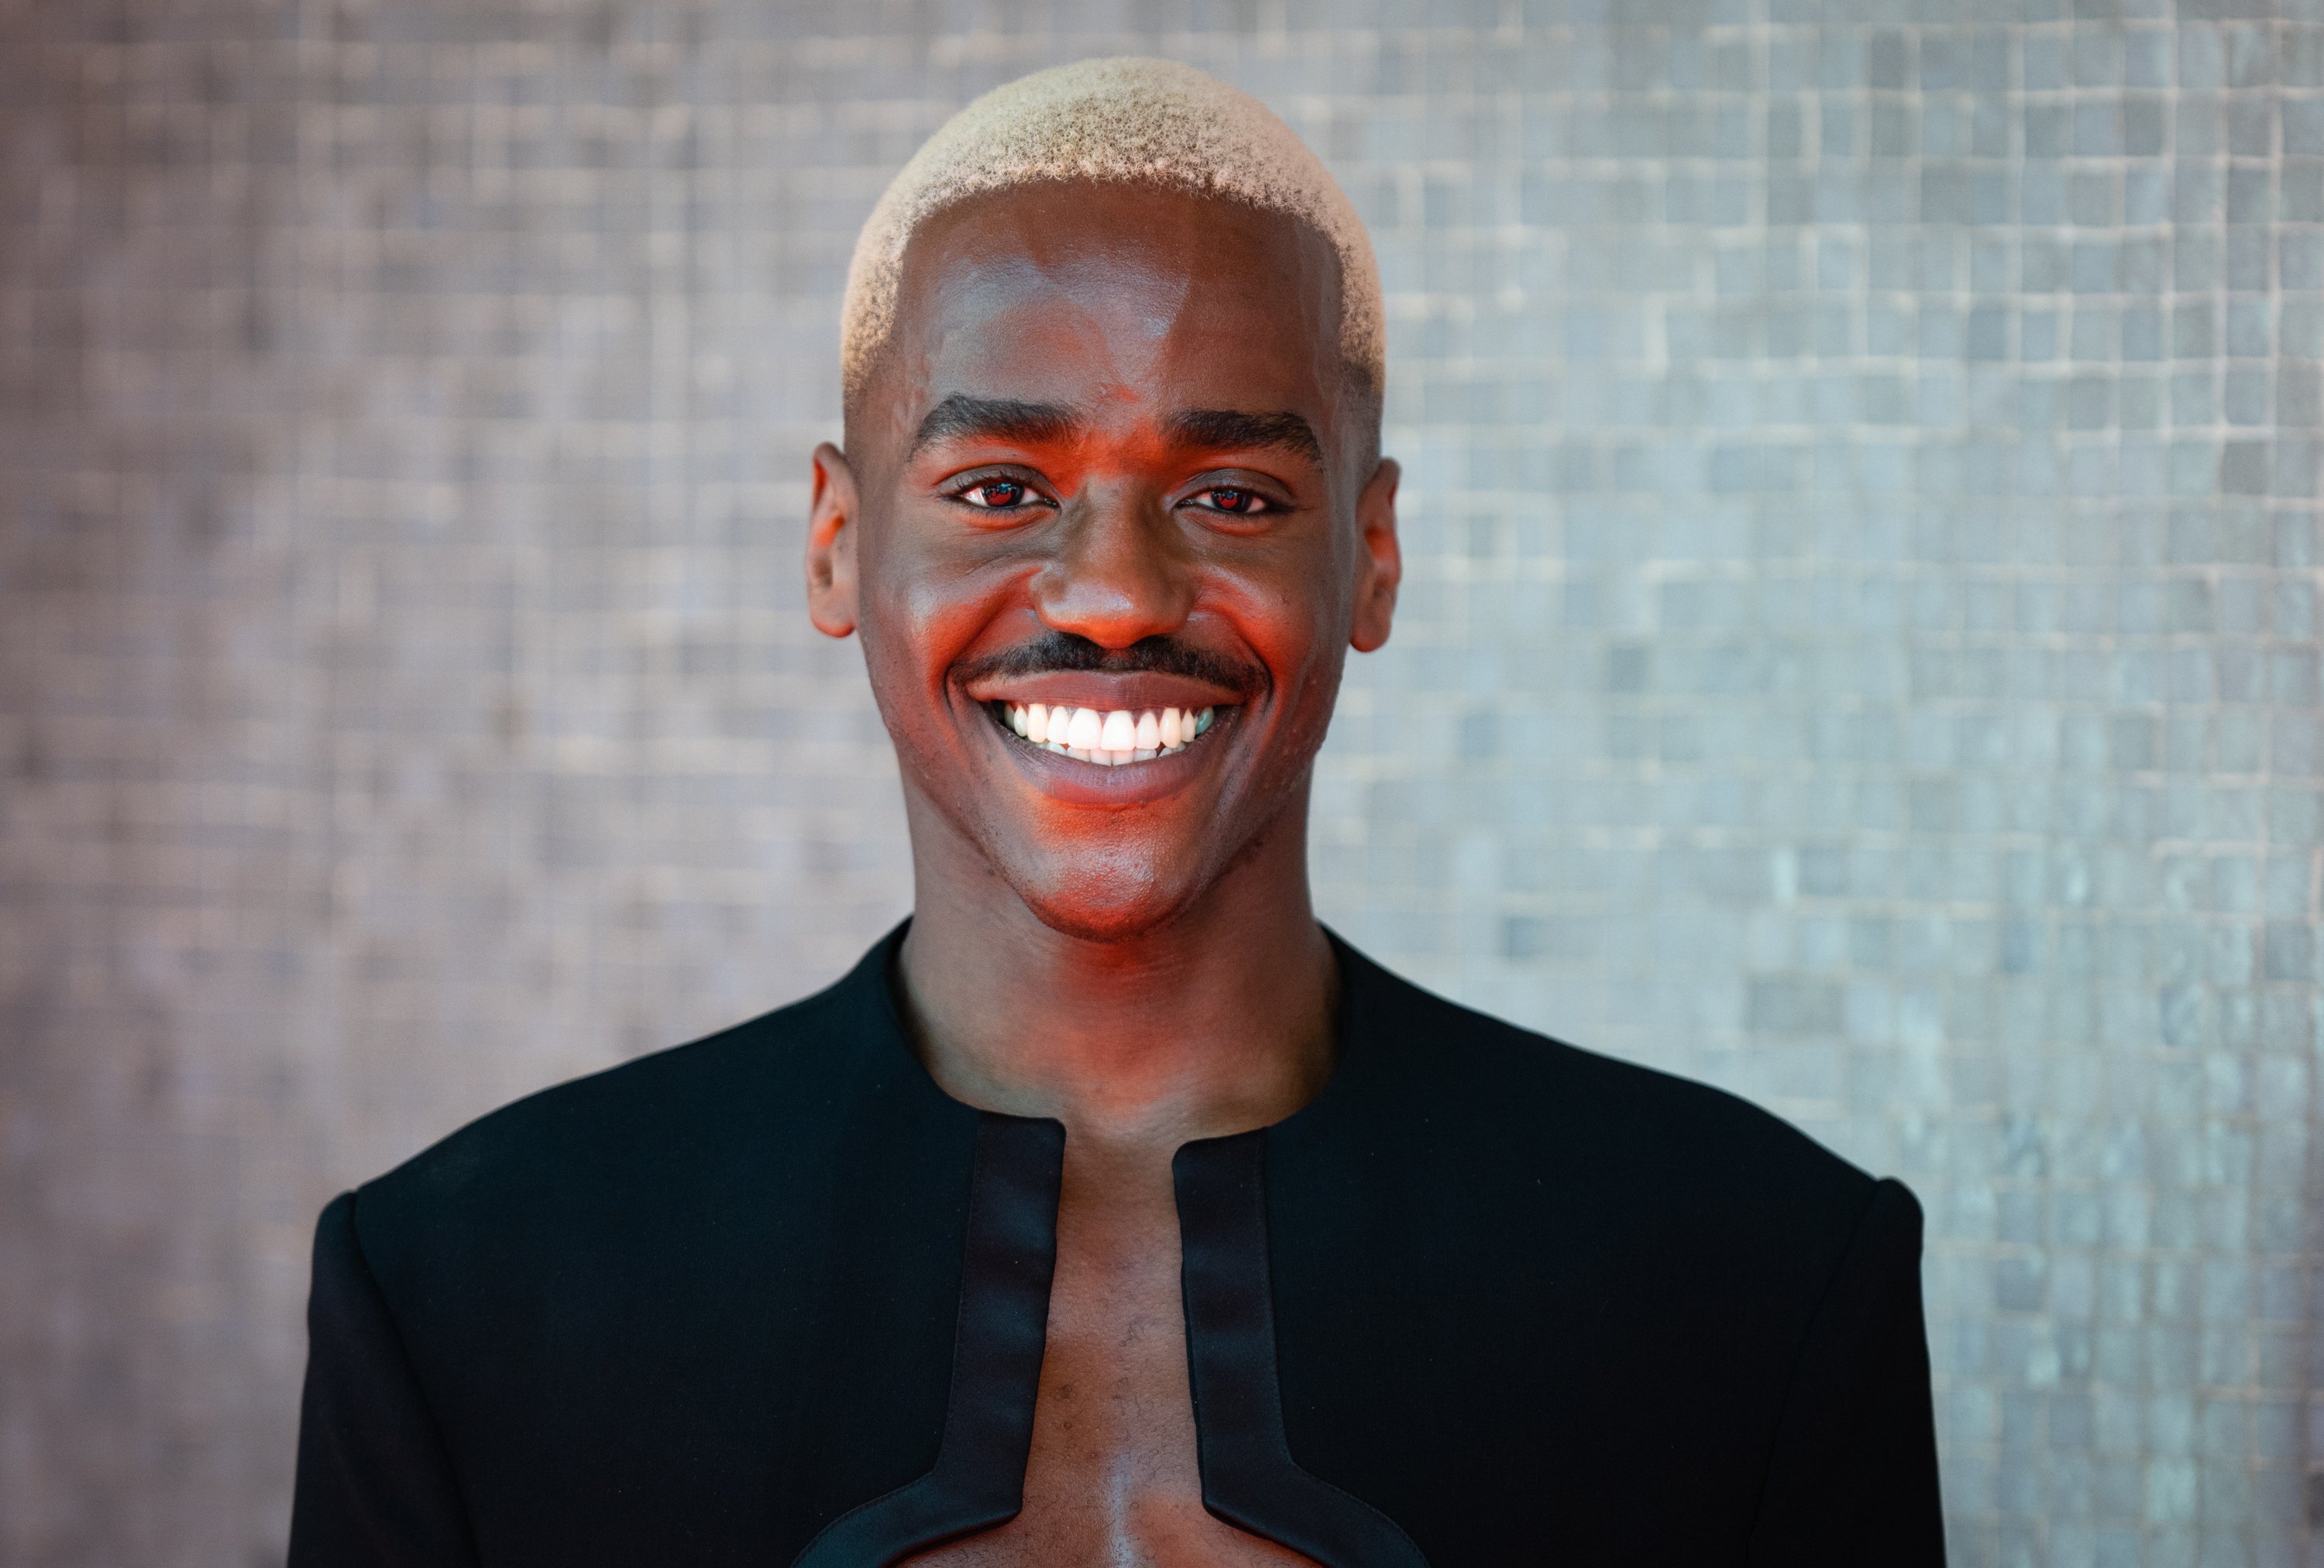 Ncuti Gatwa, a young smiling man with bleached blonde hair and a moustache.